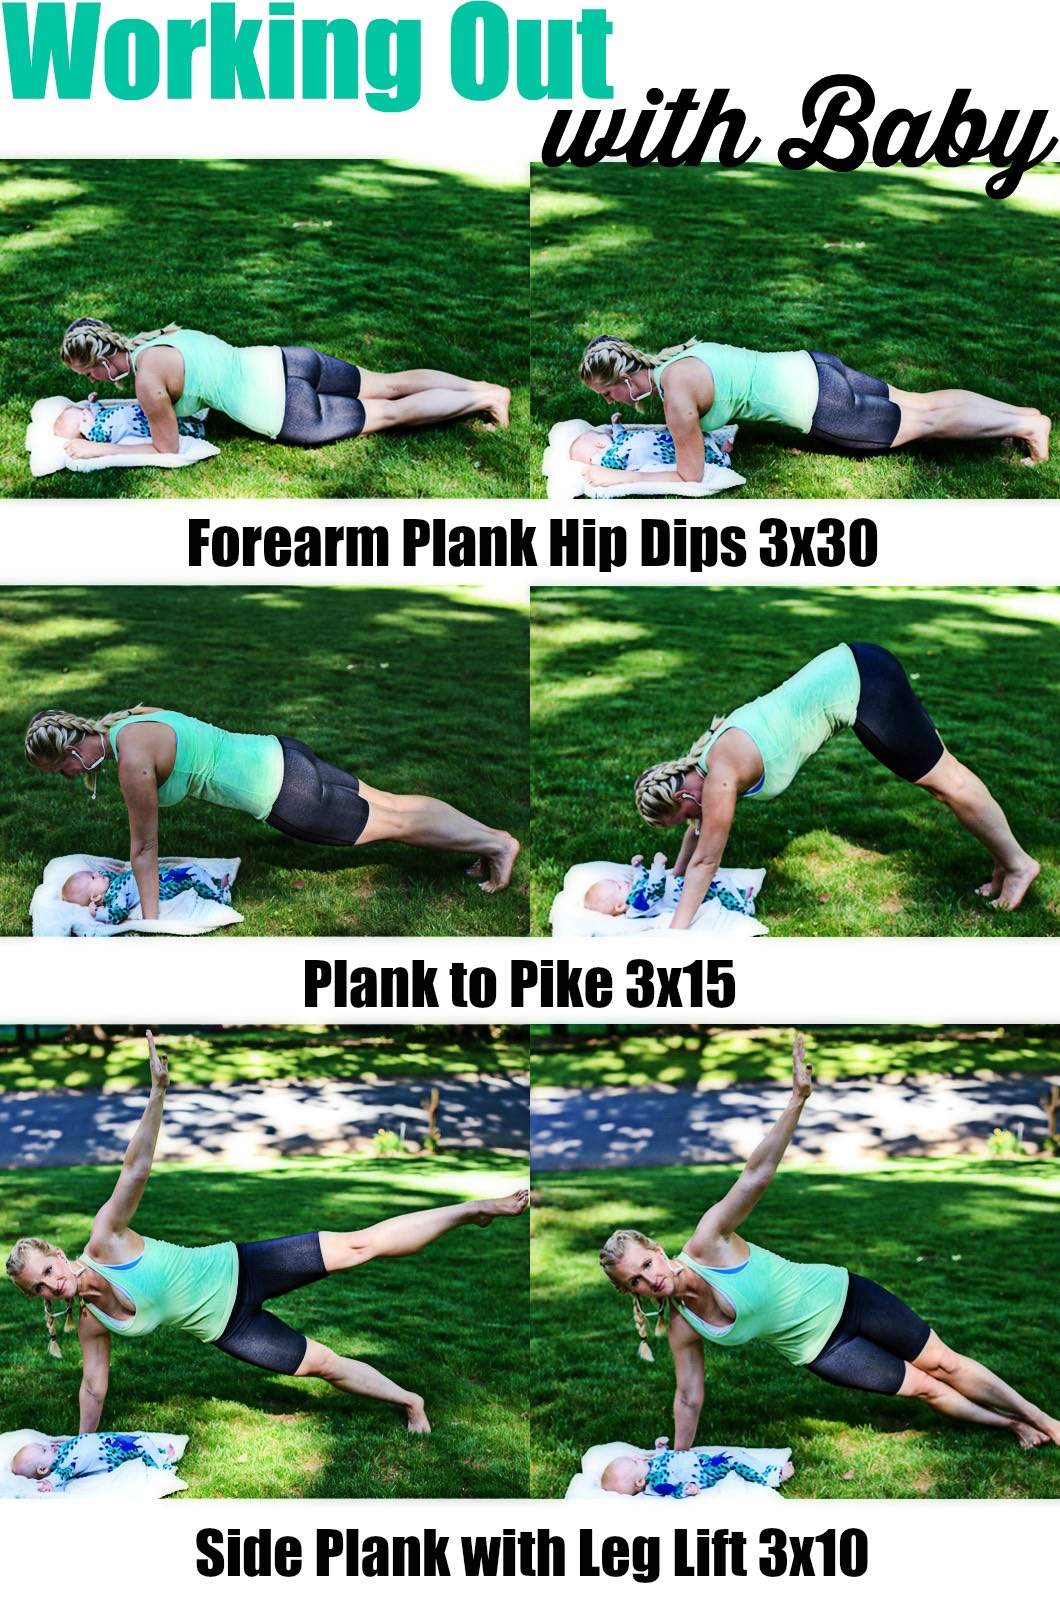 Working Out with Baby Ab Exercises - Ab Exercises: The Ultimate Postpartum Workout with Baby by Atlanta fitness blogger Happily Hughes